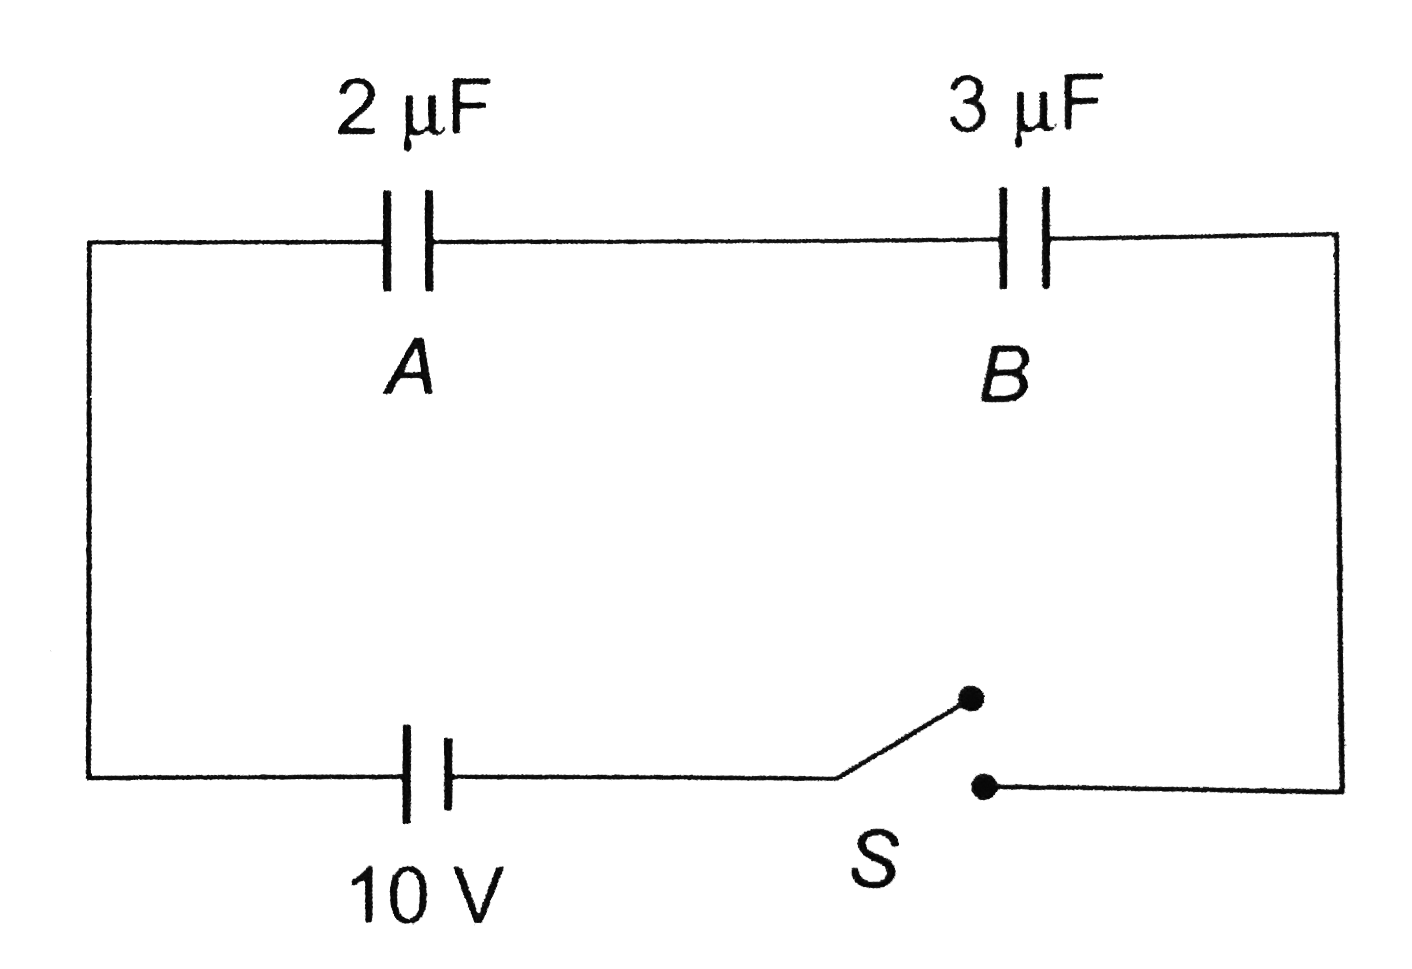 Two capacitors A and B are connected in series with a battery as shown in the figure. When the switch S is closed and the two capacitors get charged fully, then